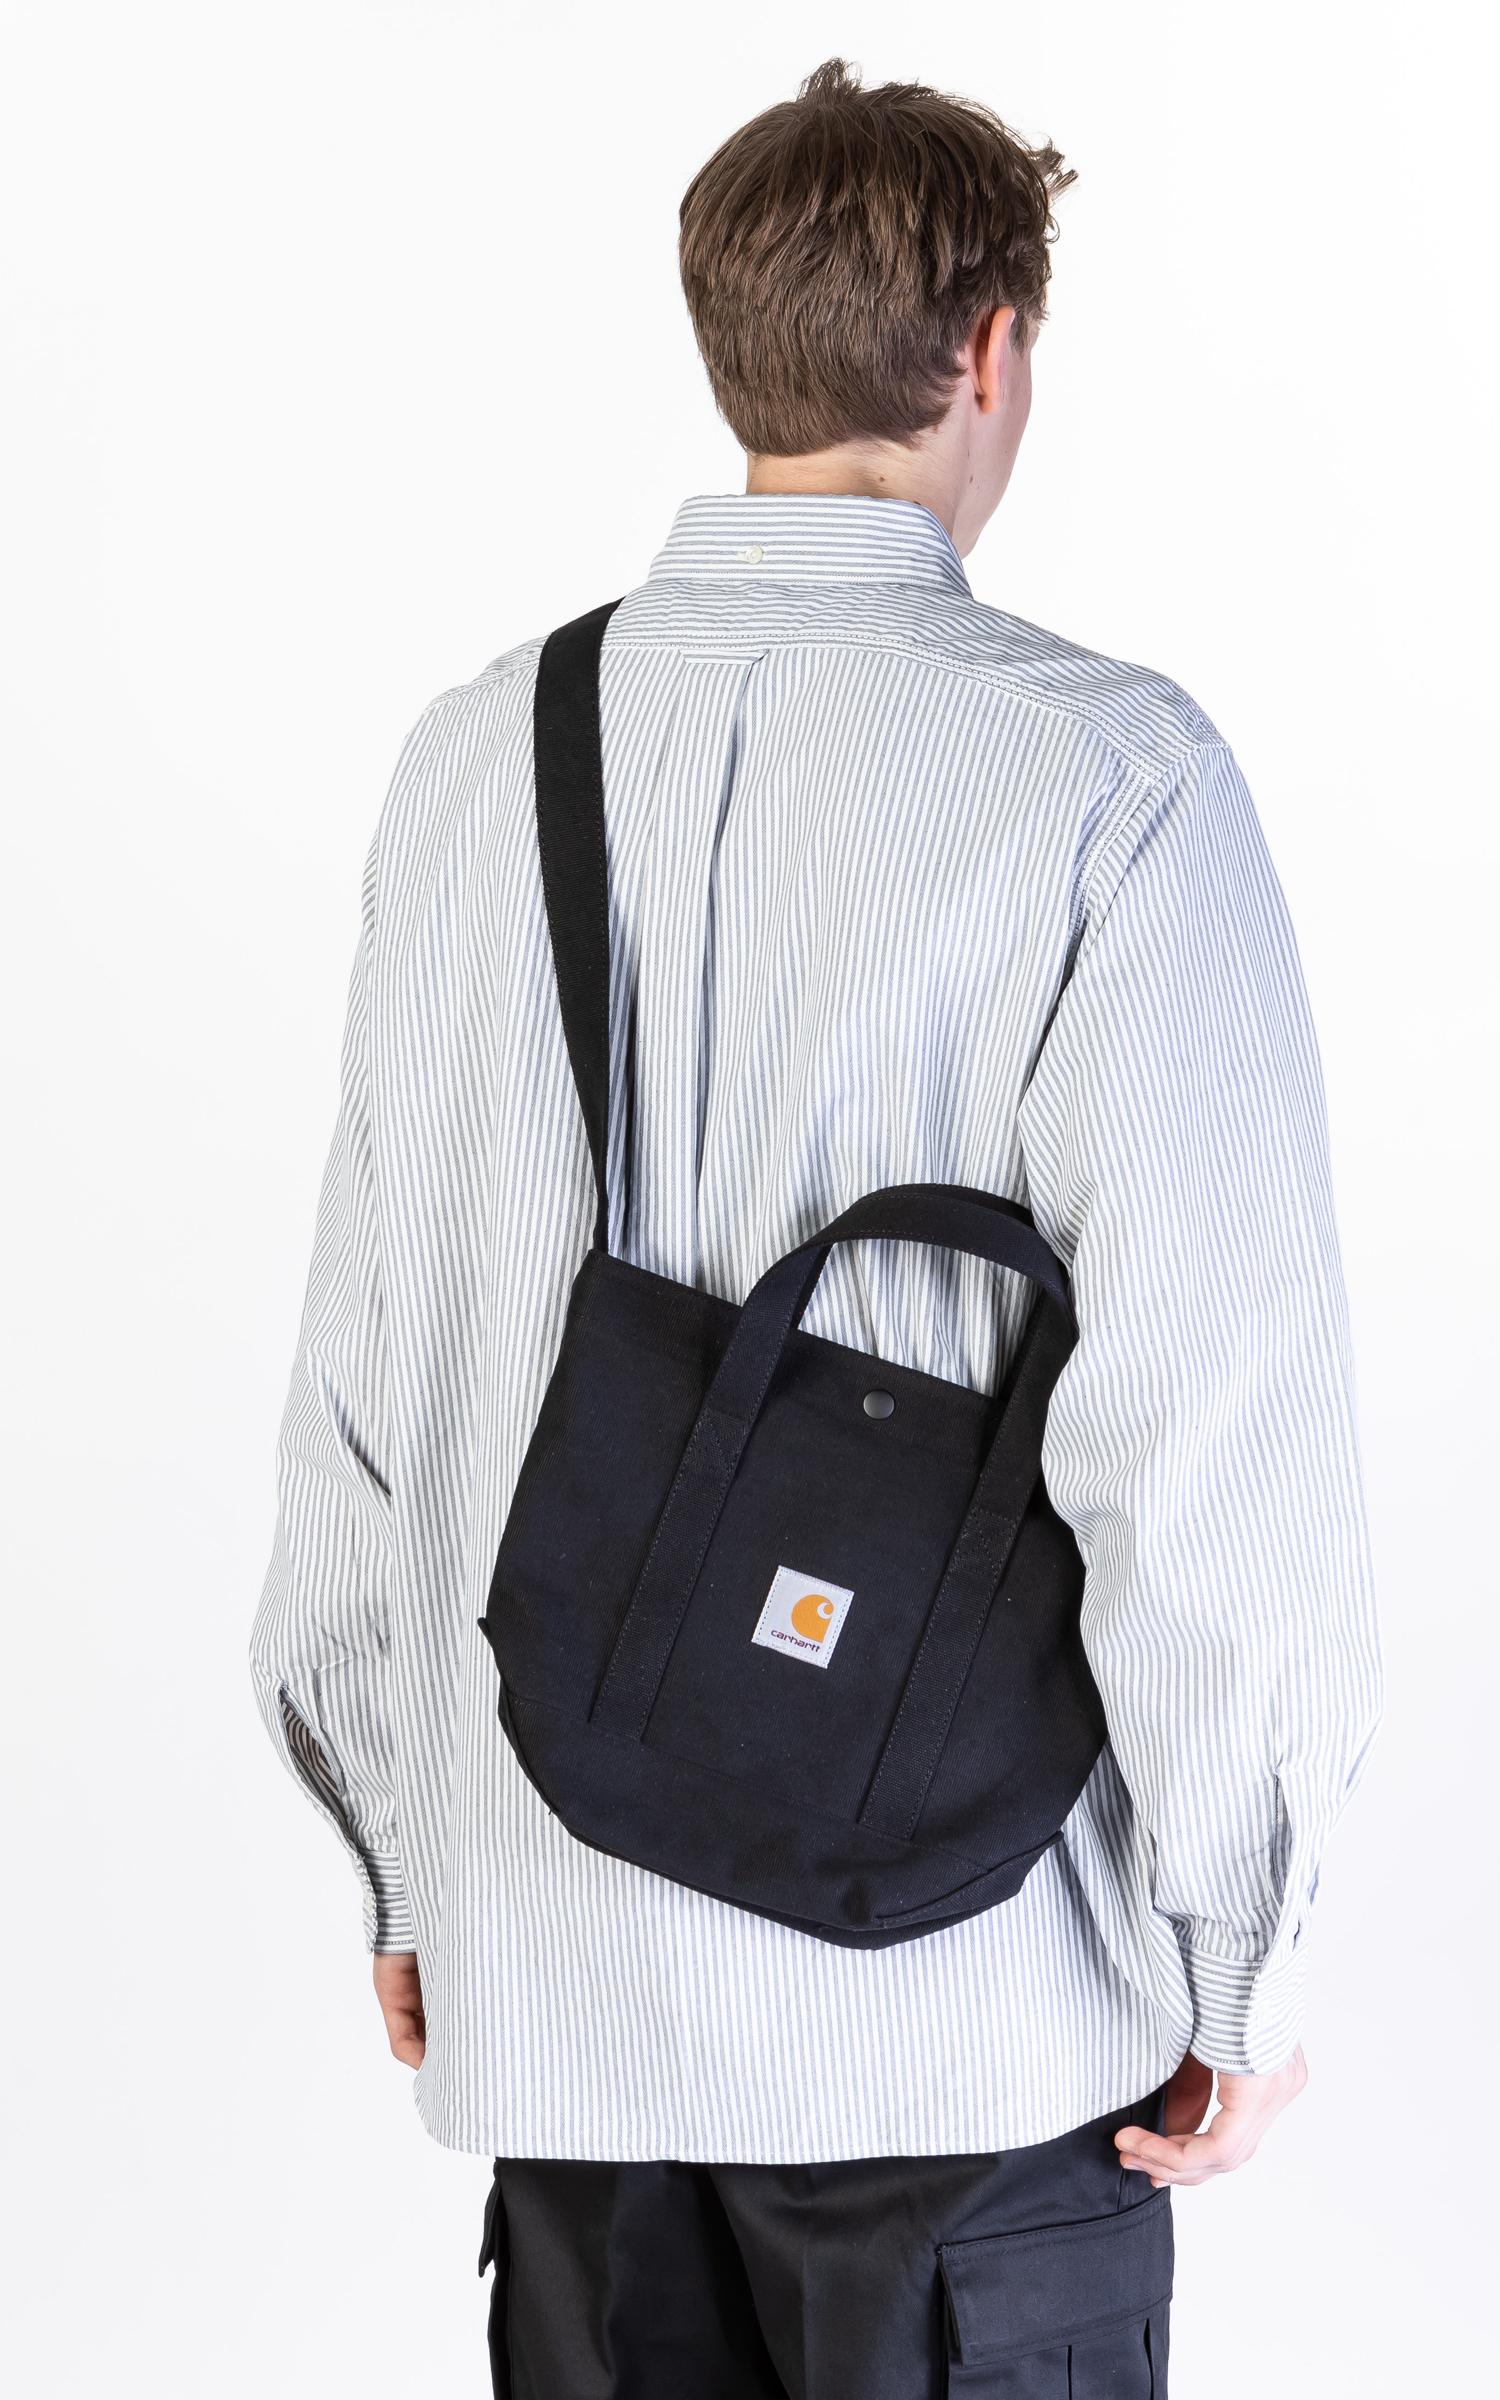 Carhartt WIP Canvas Small Tote Black/black for Men - Lyst